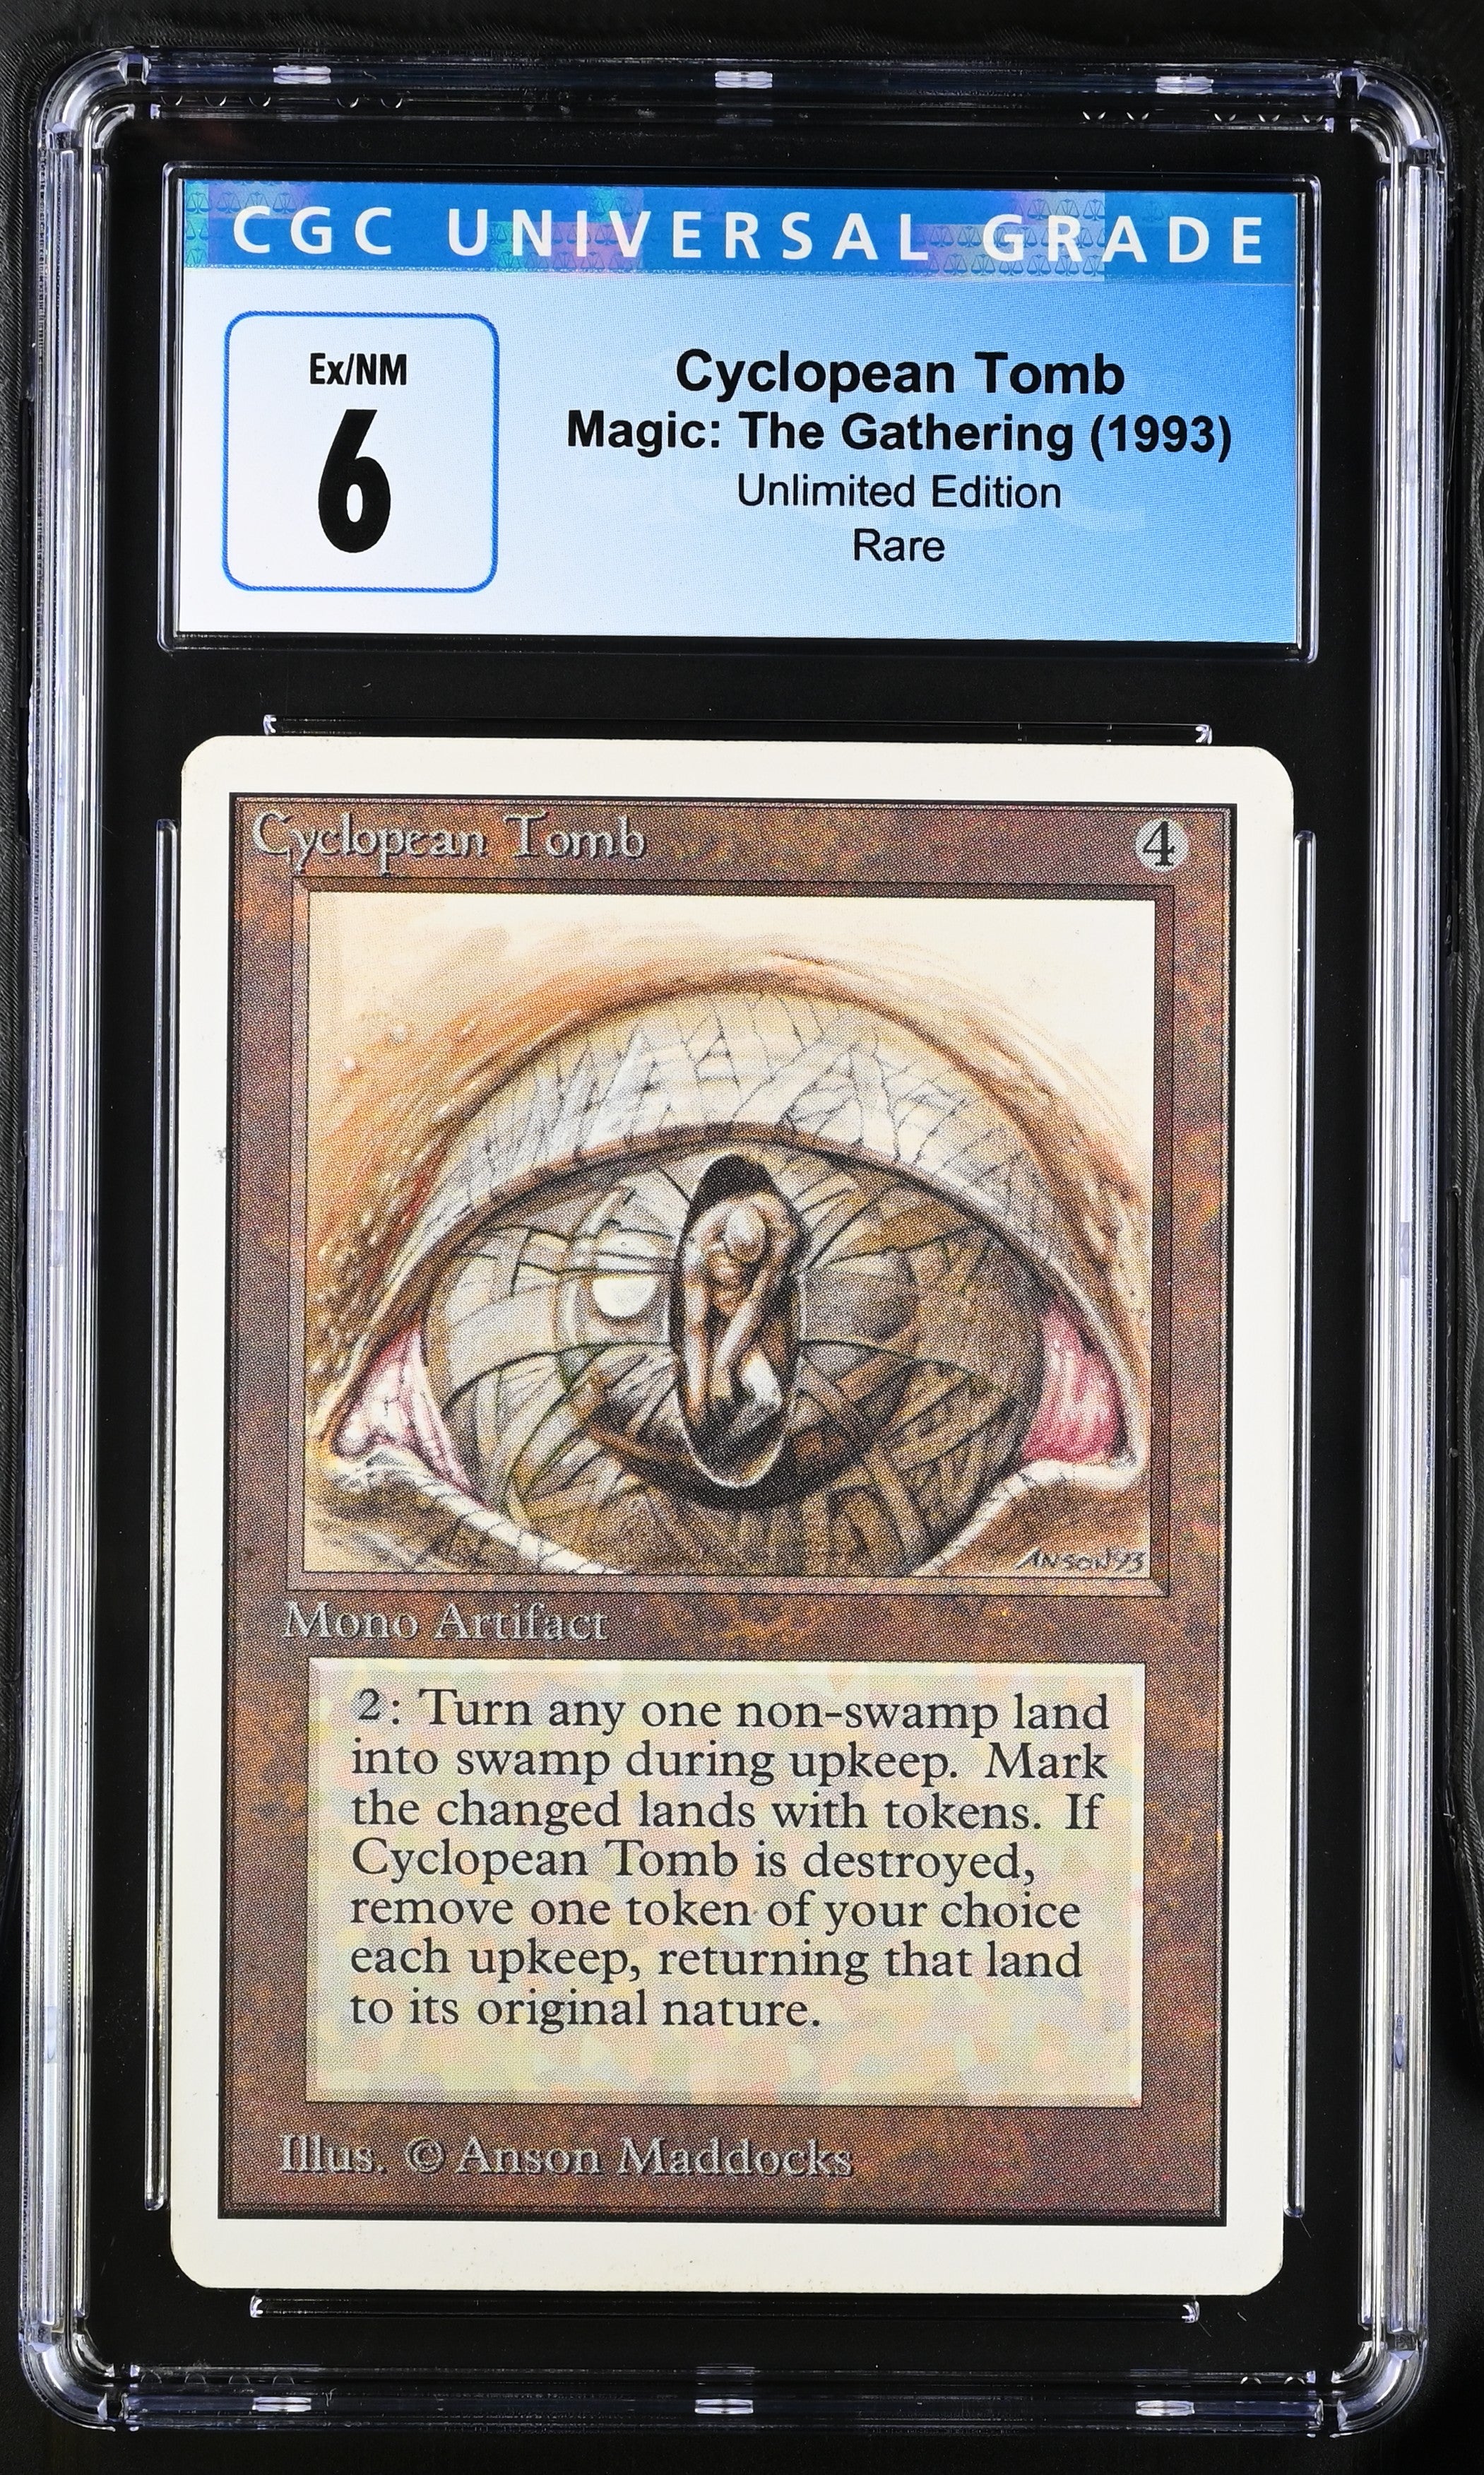 Magic: The Gathering MTG Cyclopean Tomb [Unlimited Edition] Graded CGC 6 Ex/NM